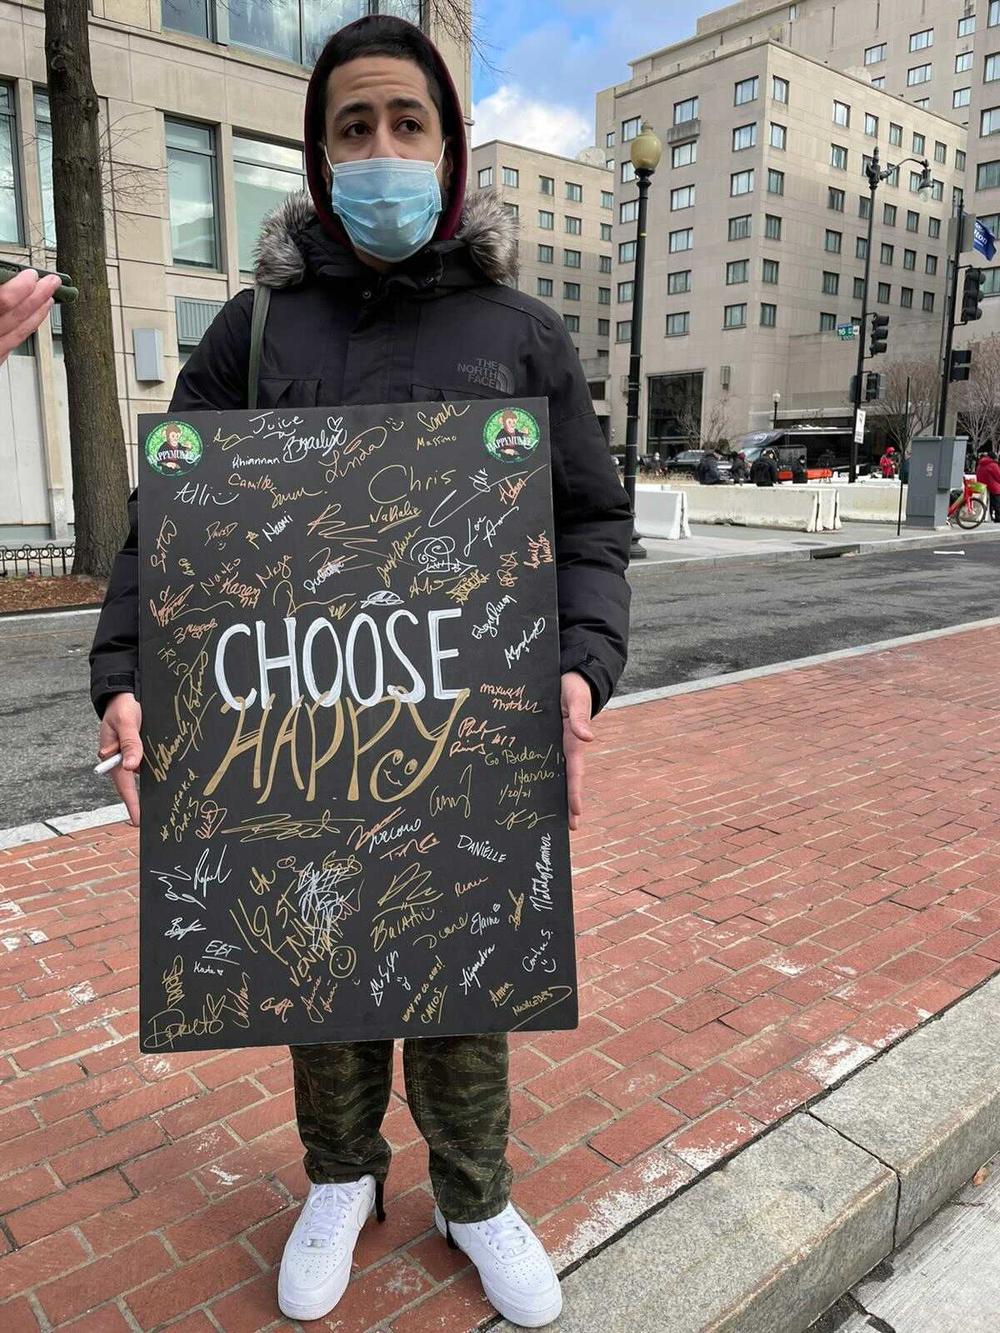 David Hernandez is a cannabis legalization activist from New York. Some people have signed his sign while others have been suspicious of adding their signatures.